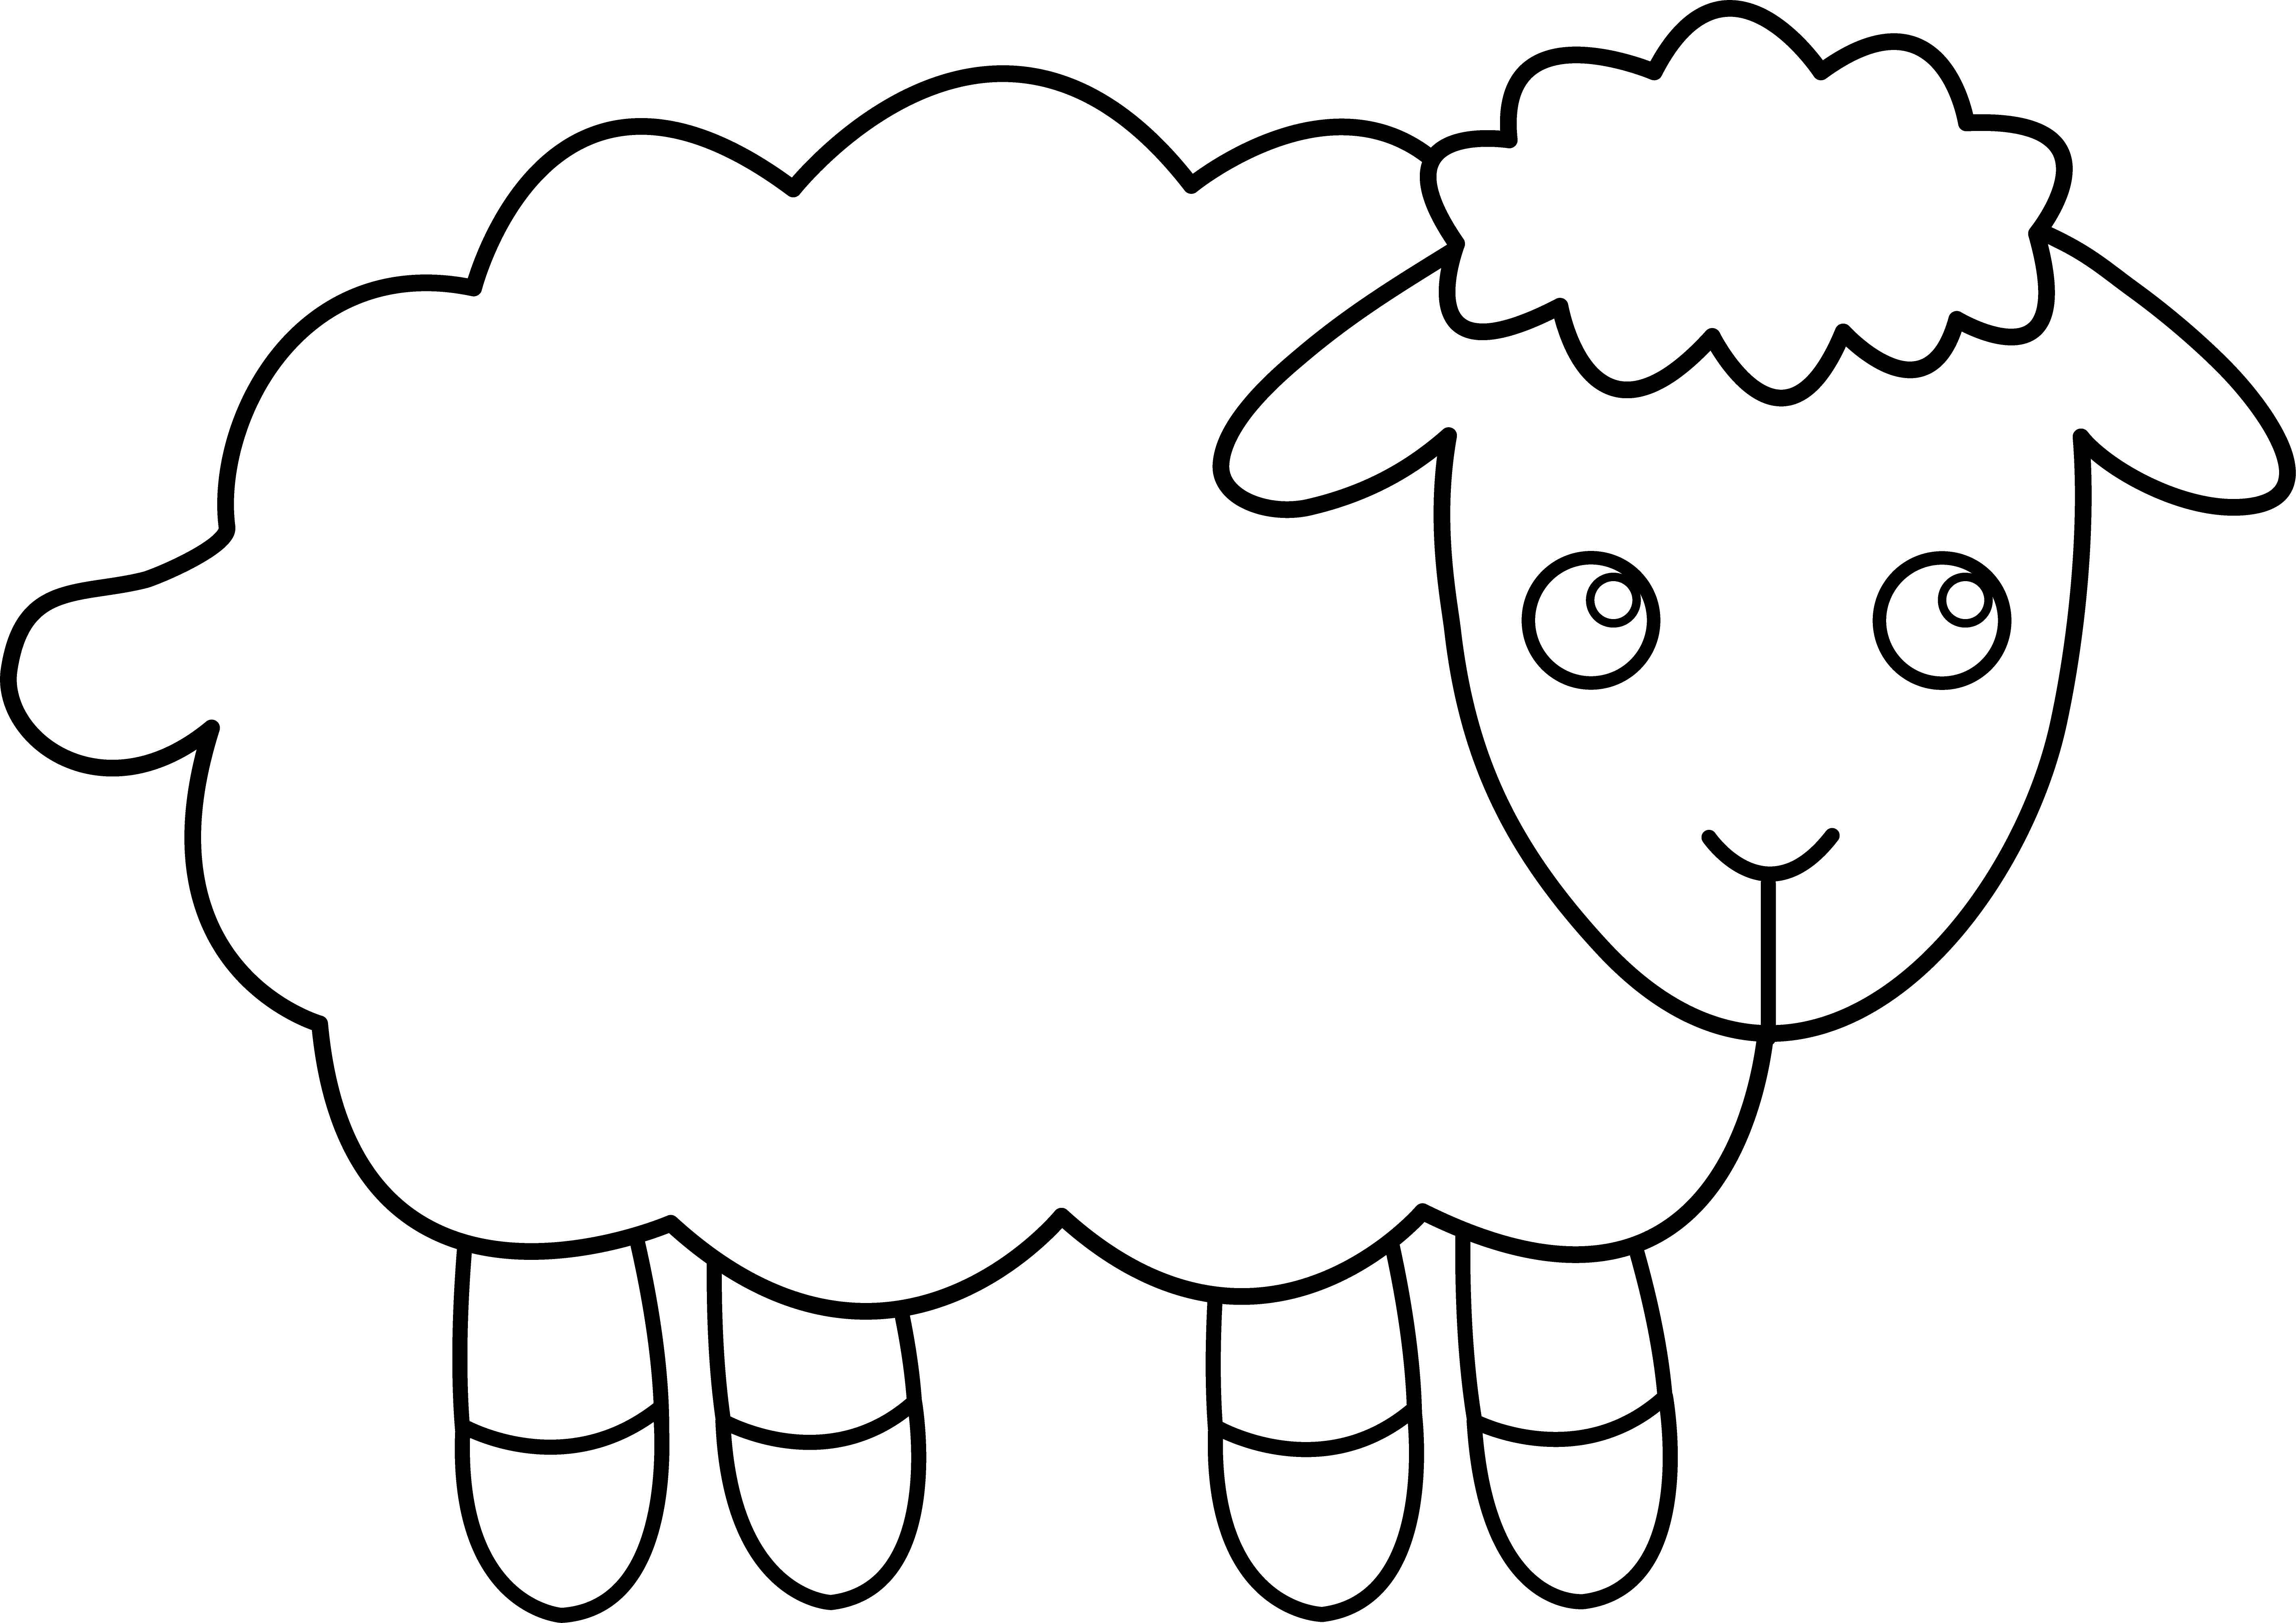 Baby Sheep Clipart | Clipart Panda - Free Clipart Images